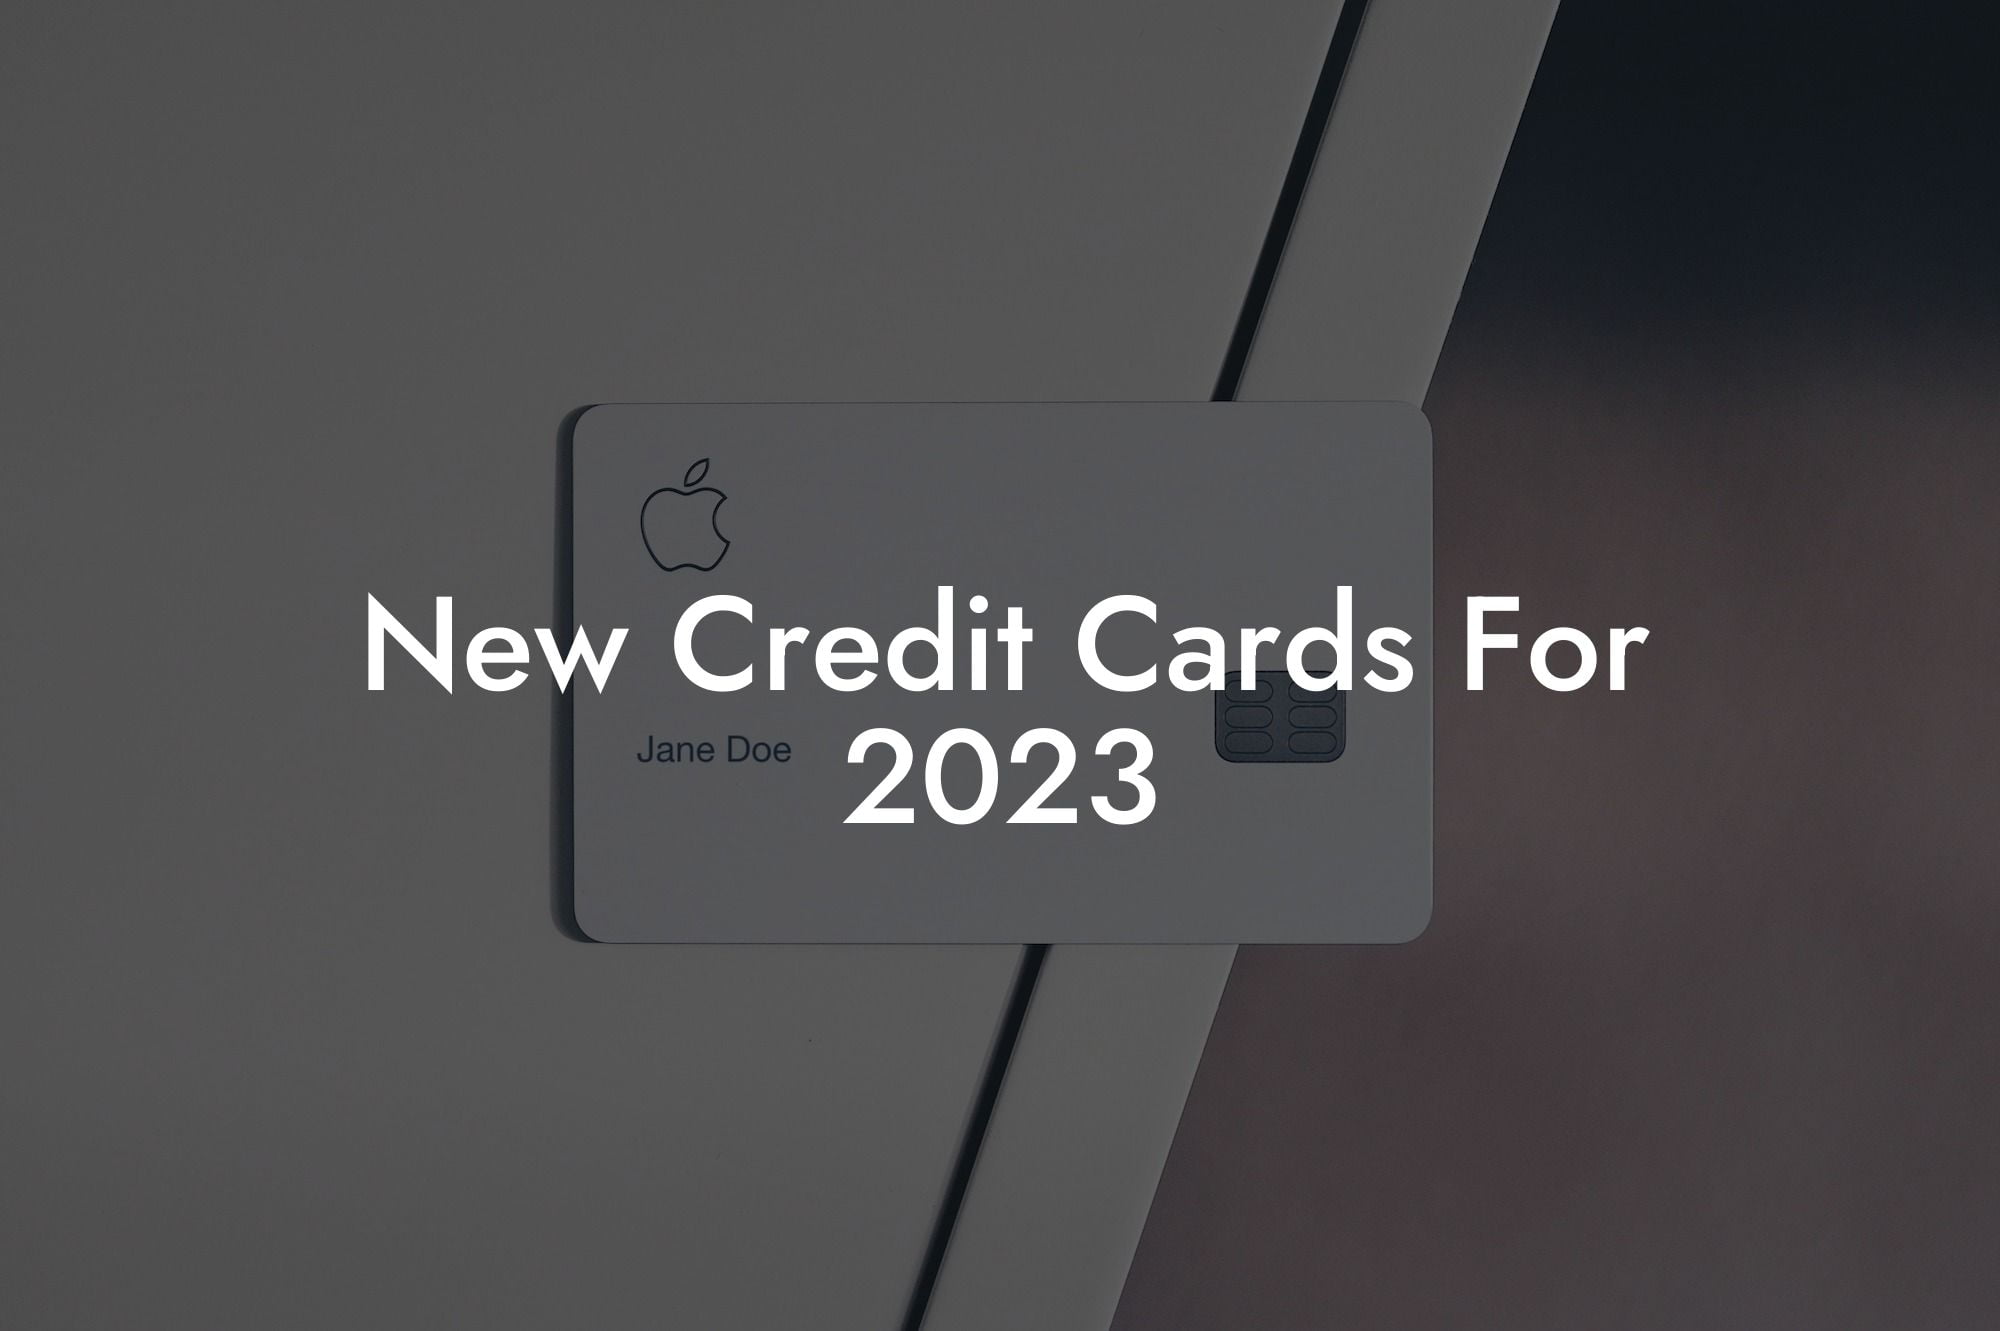 New Credit Cards For 2023